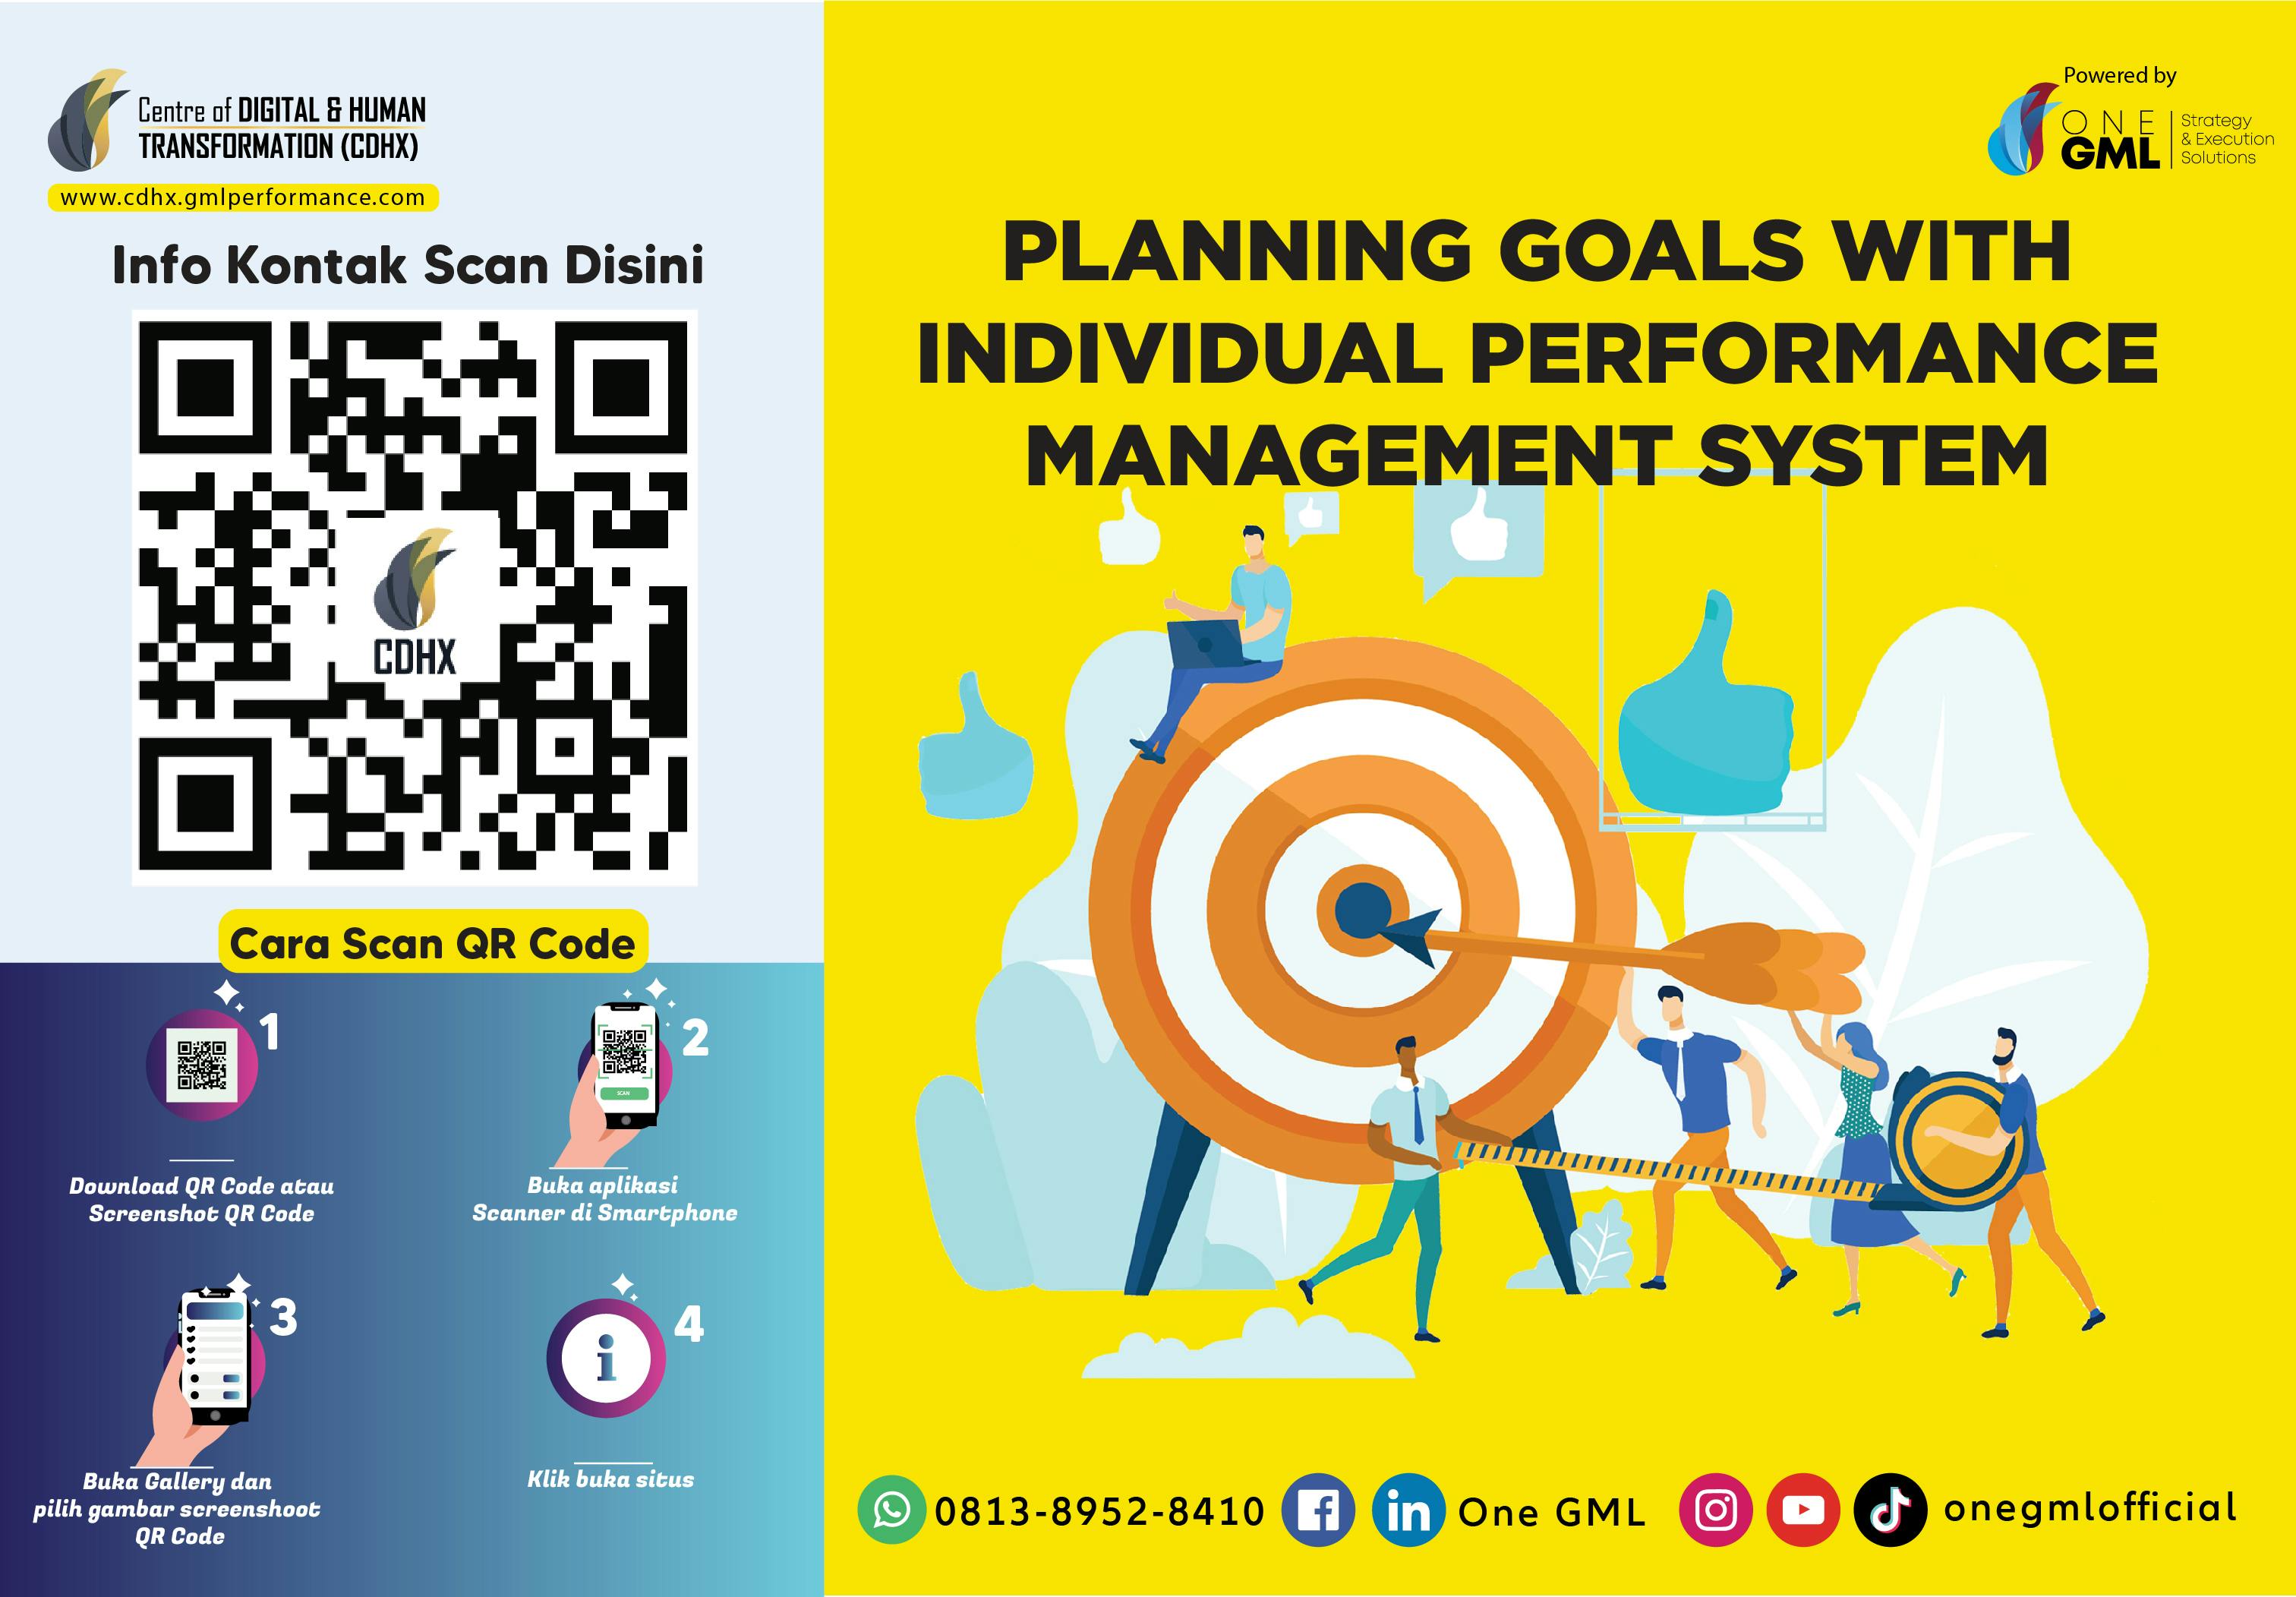 Planning Goals with Individual Performance Management System